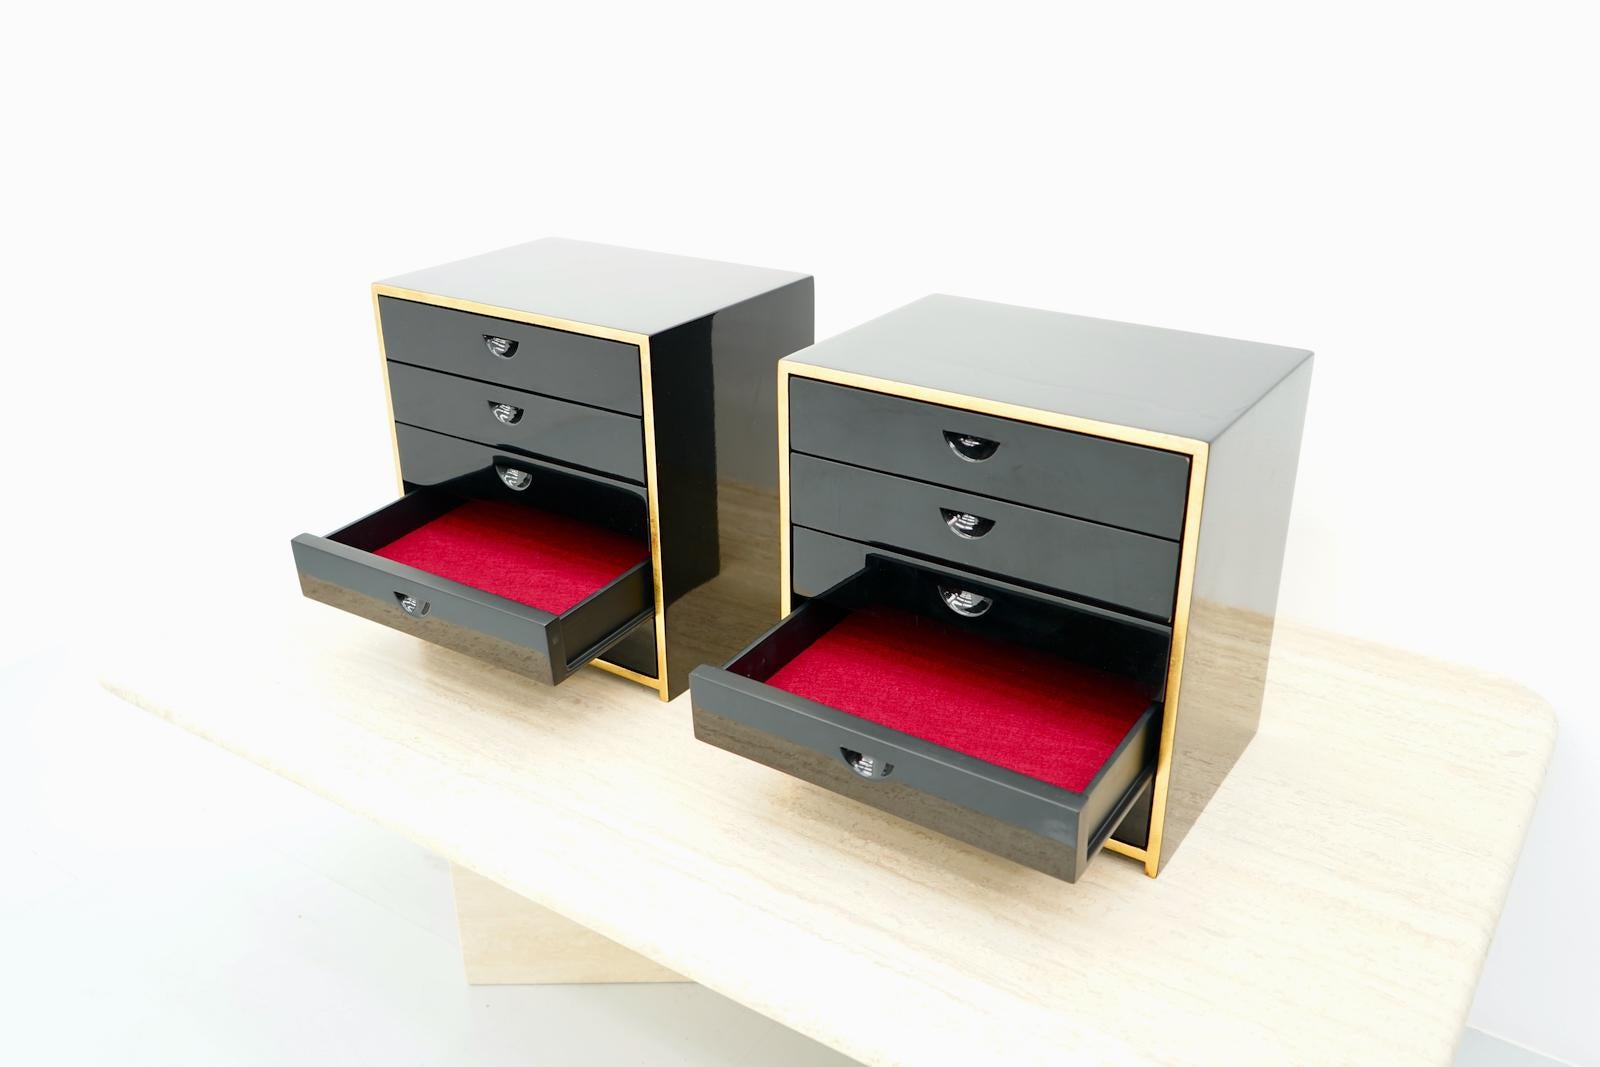 A pair of jewelry cabinets with each five drawers. The cabinets are glossy black lacquered and are lined with red felt on the inside. The outer edge is oversightwith gold leaf. Very high quality workmanship. Very good condition. 
The cabinets were